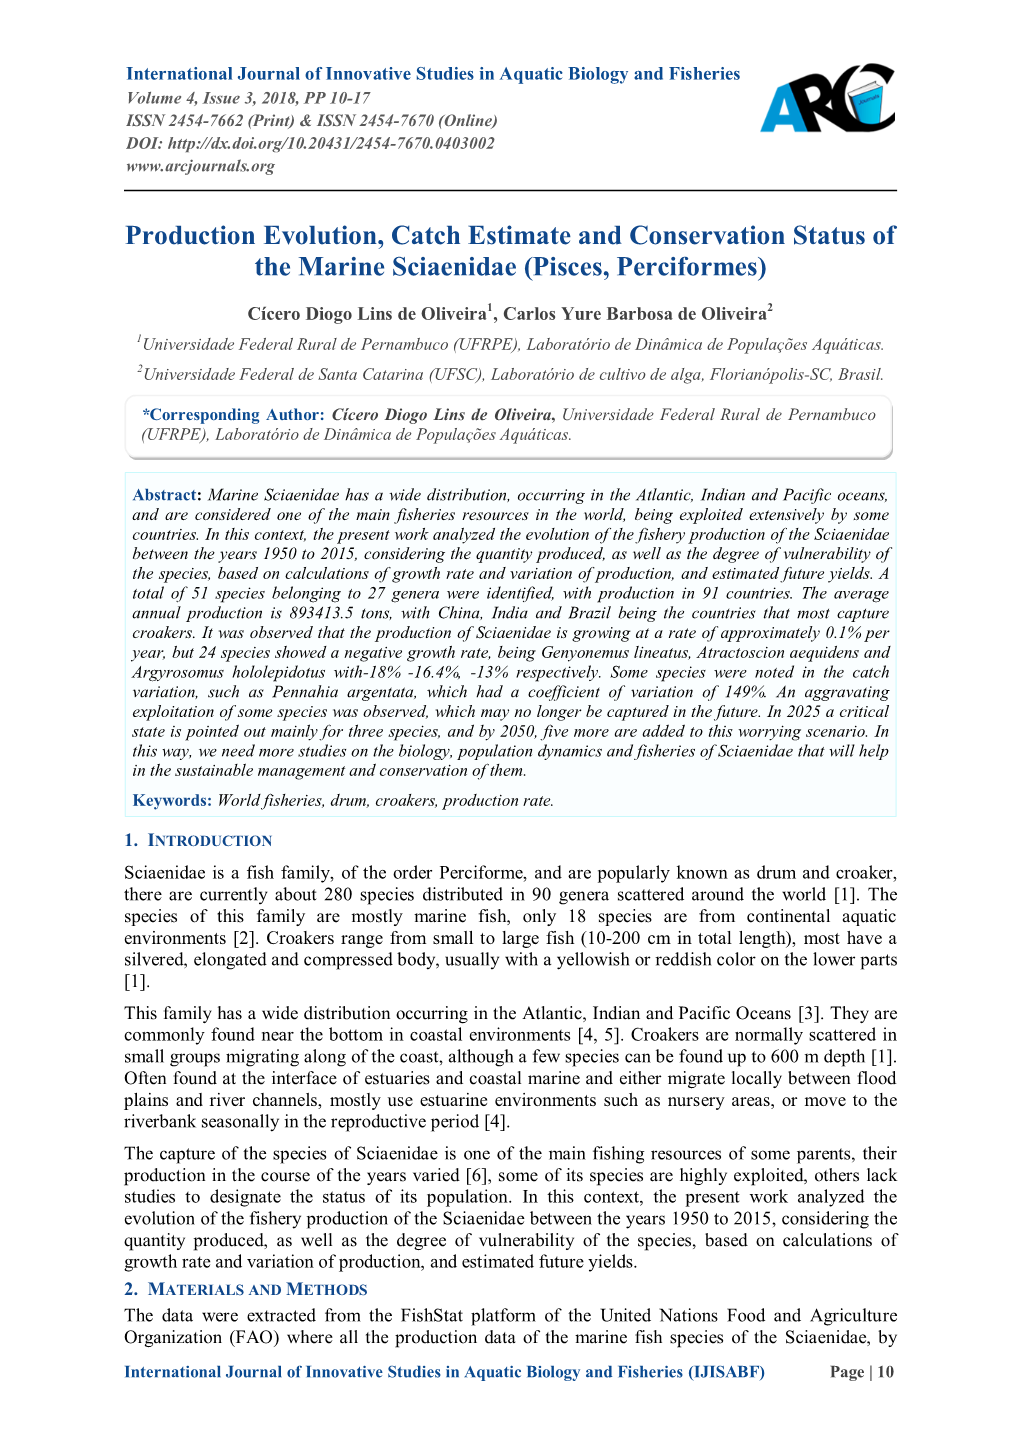 Production Evolution, Catch Estimate and Conservation Status of the Marine Sciaenidae (Pisces, Perciformes)